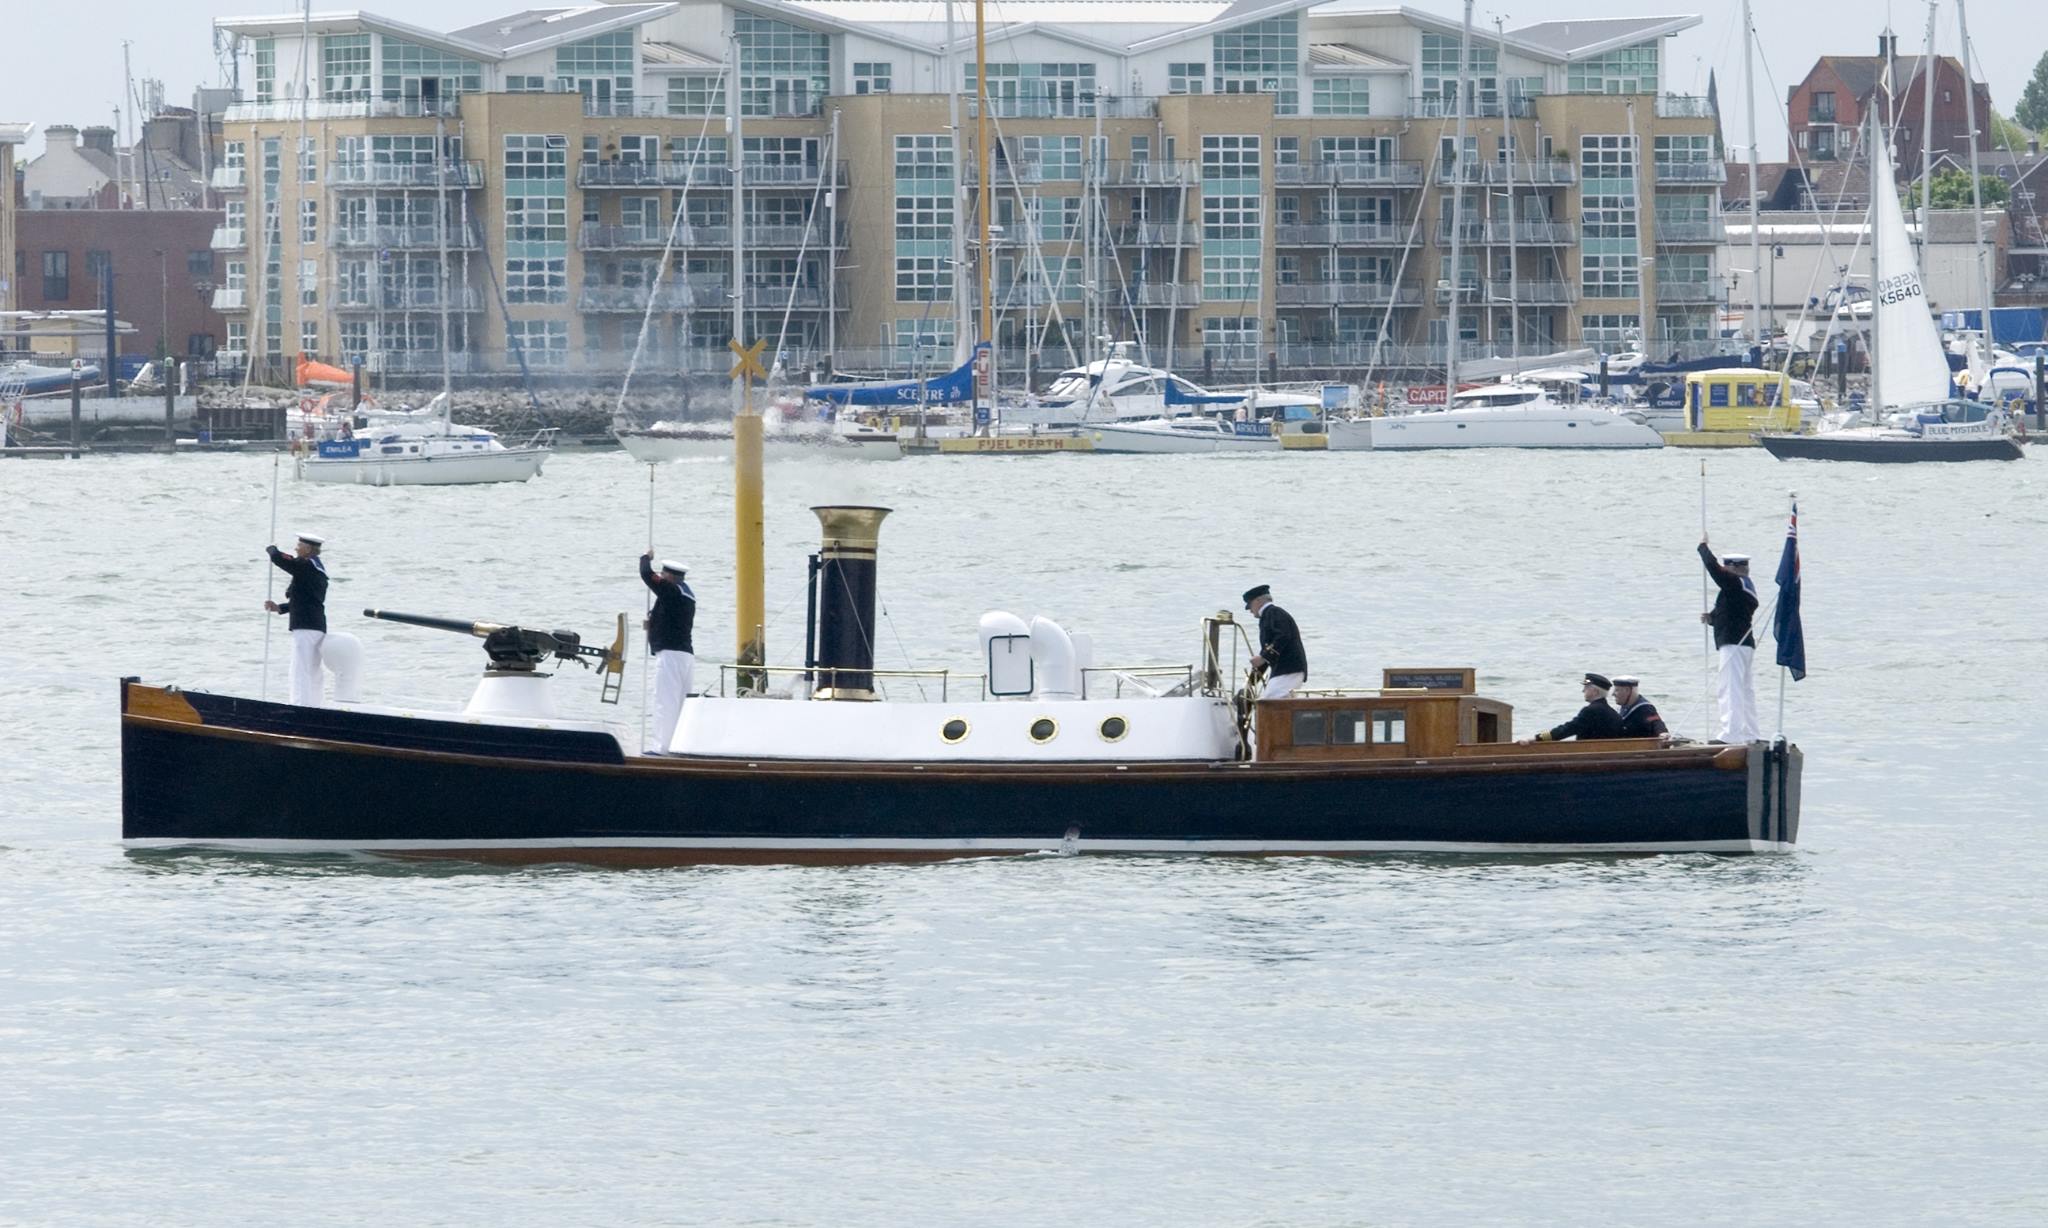 Steam Pinnace 199 was built for the Royal Navy at Cowes in 1911.jpg